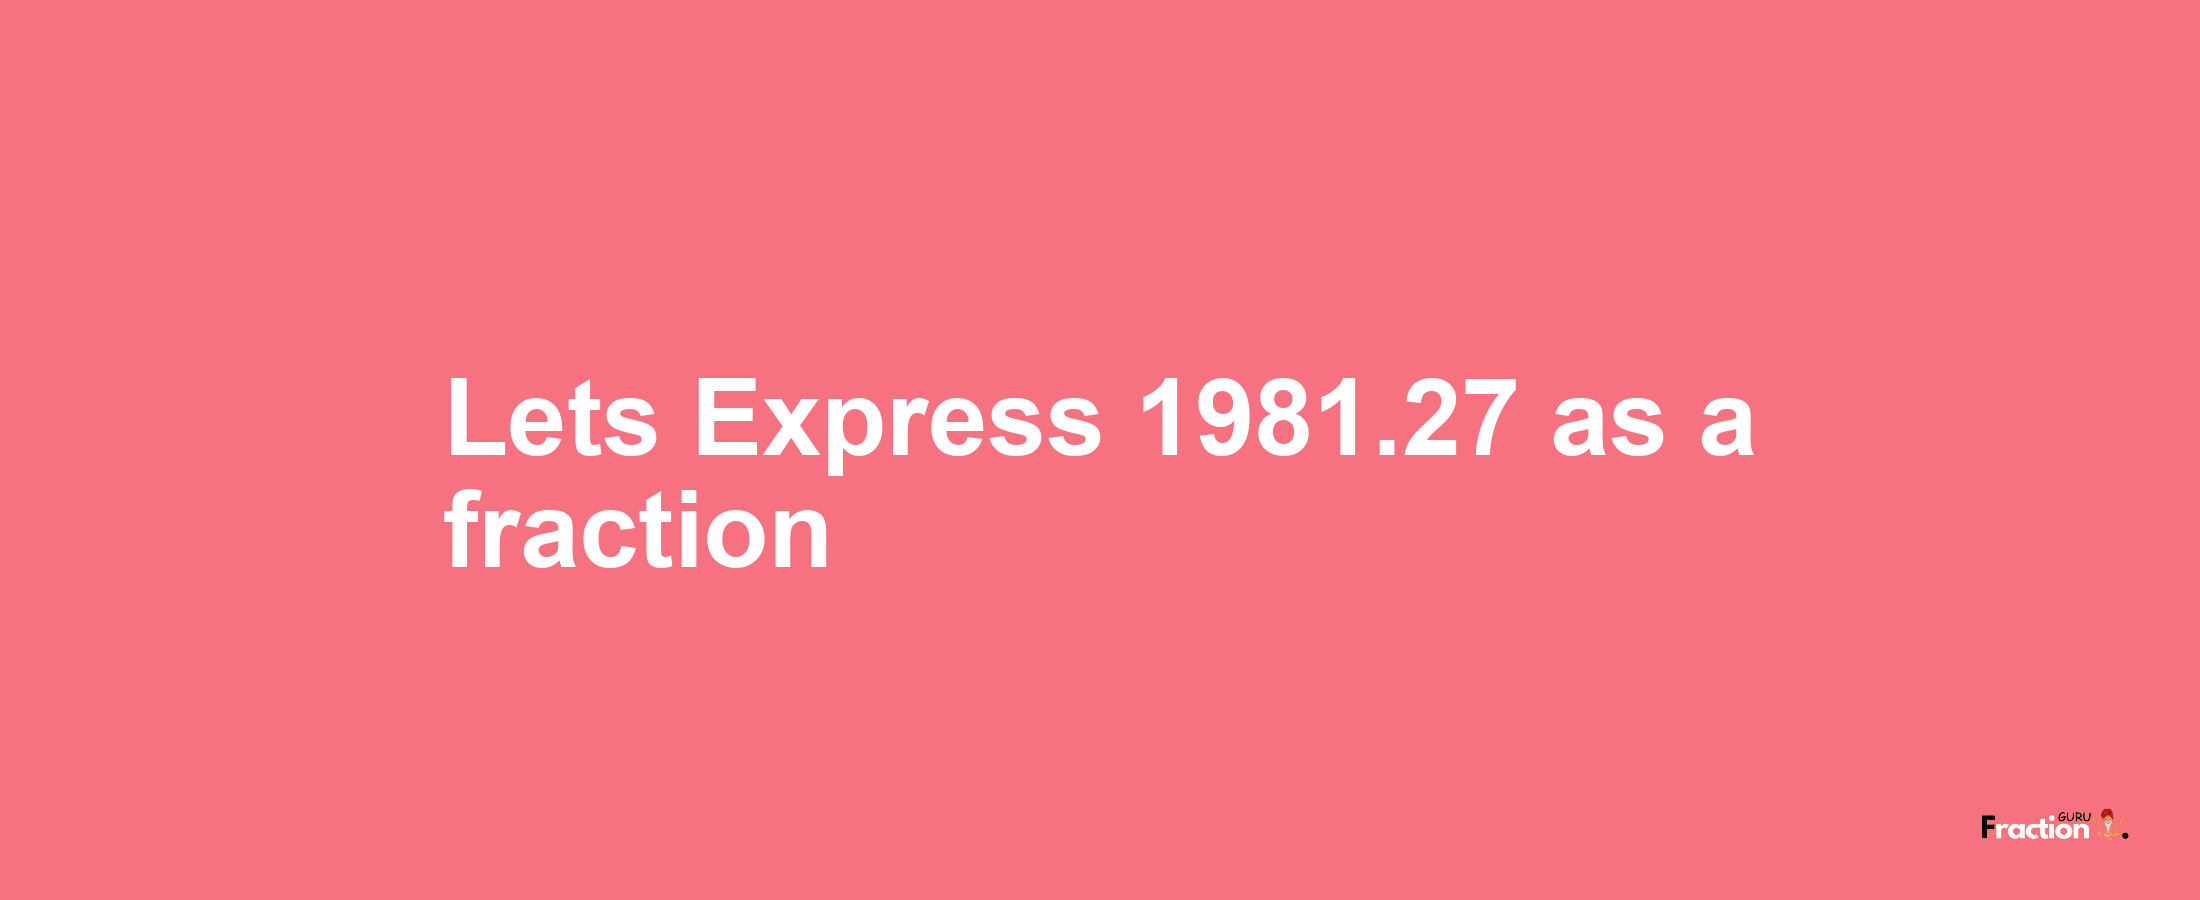 Lets Express 1981.27 as afraction